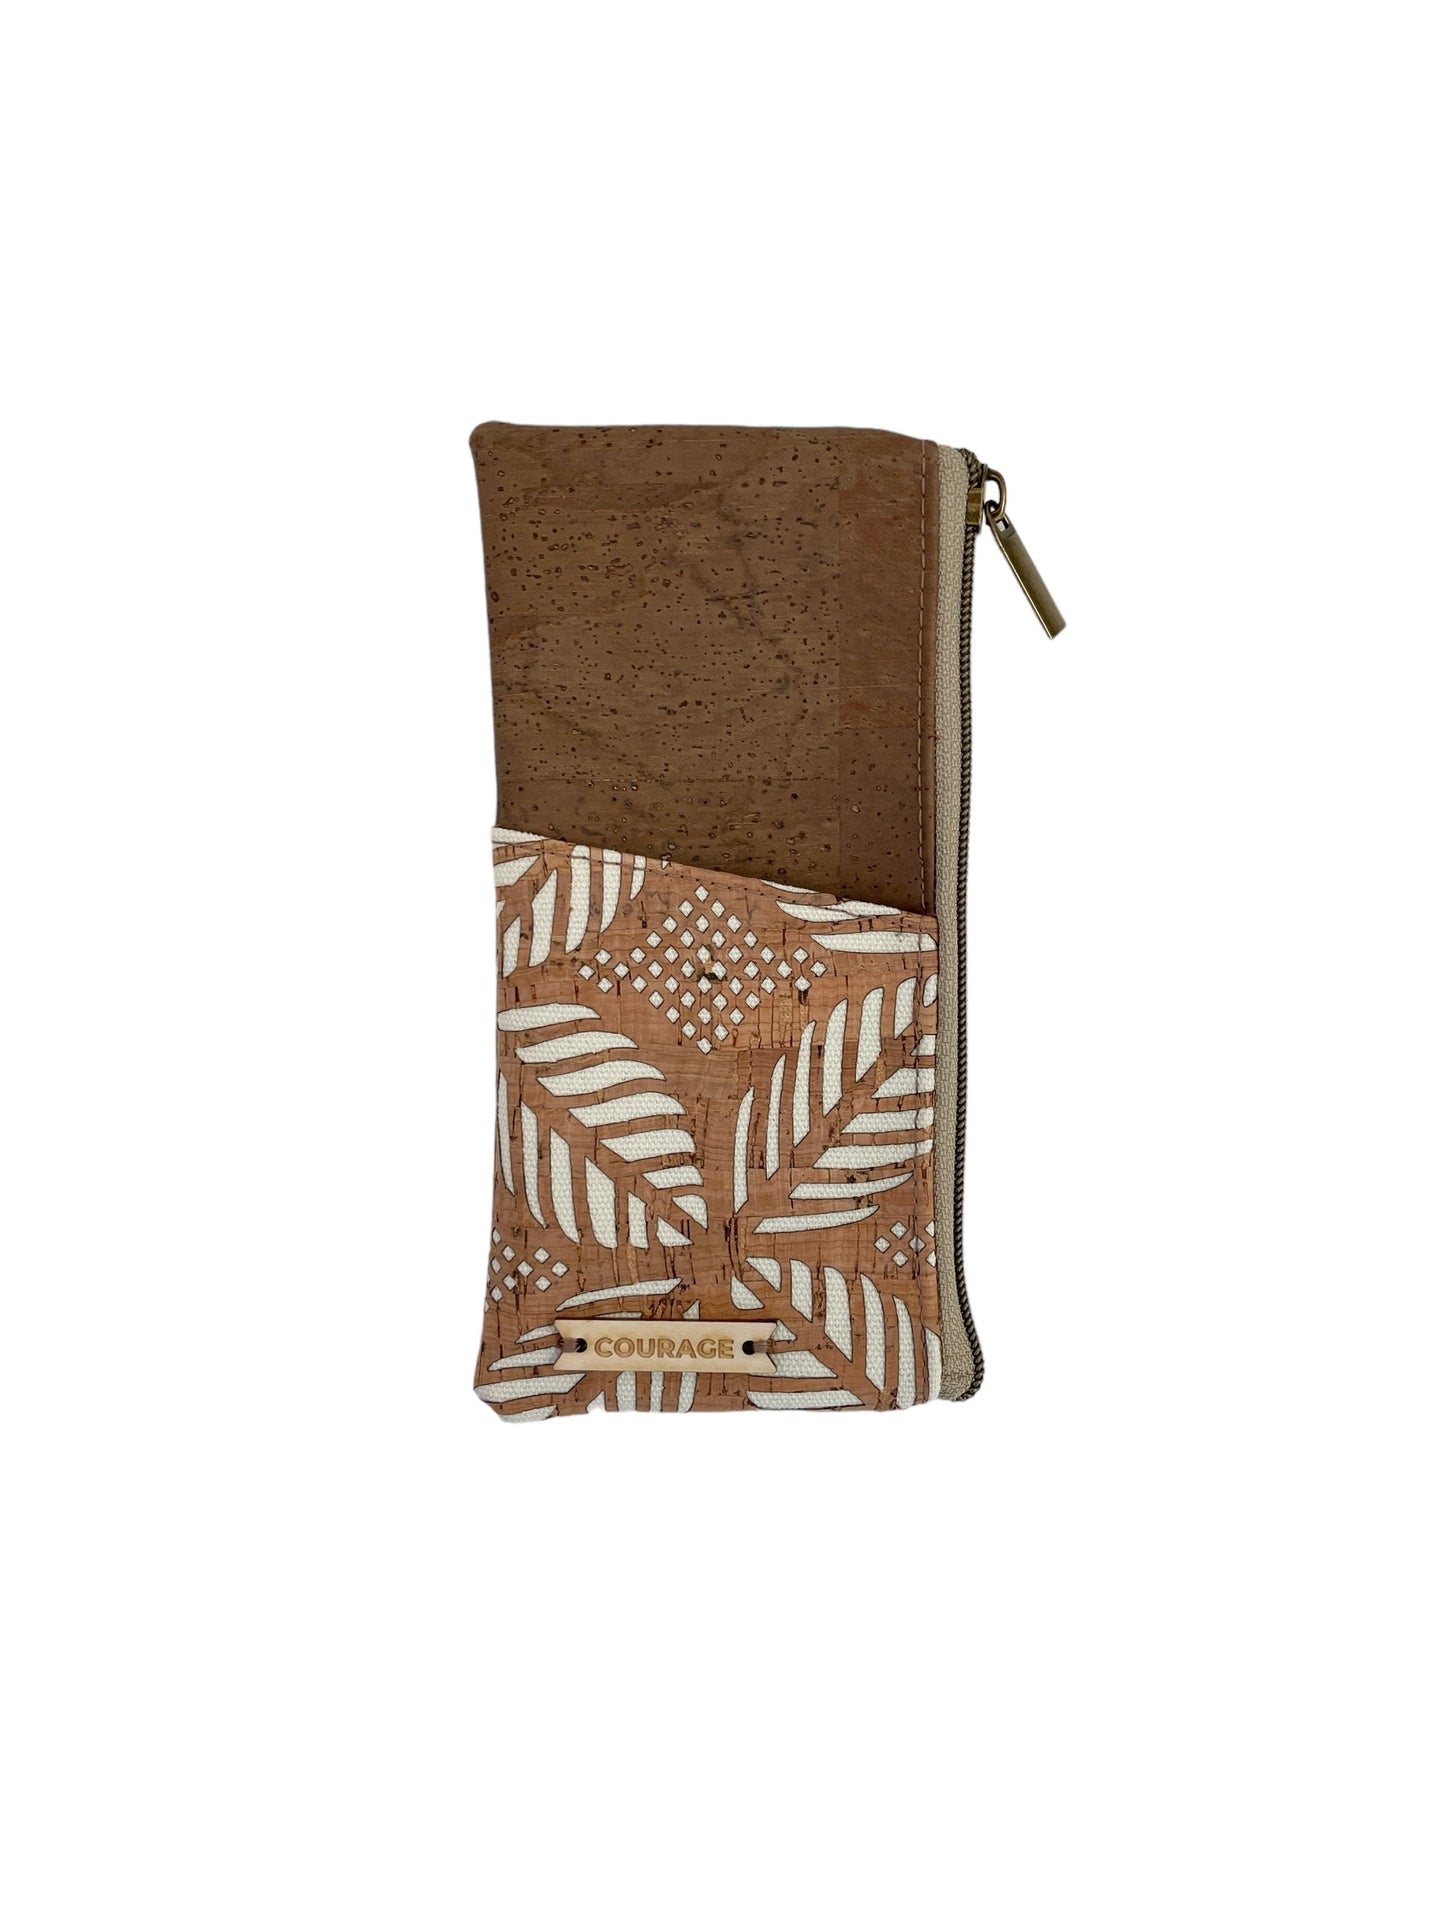 
                  
                    SIDEKICK notebook pouch by Carry Courage
                  
                